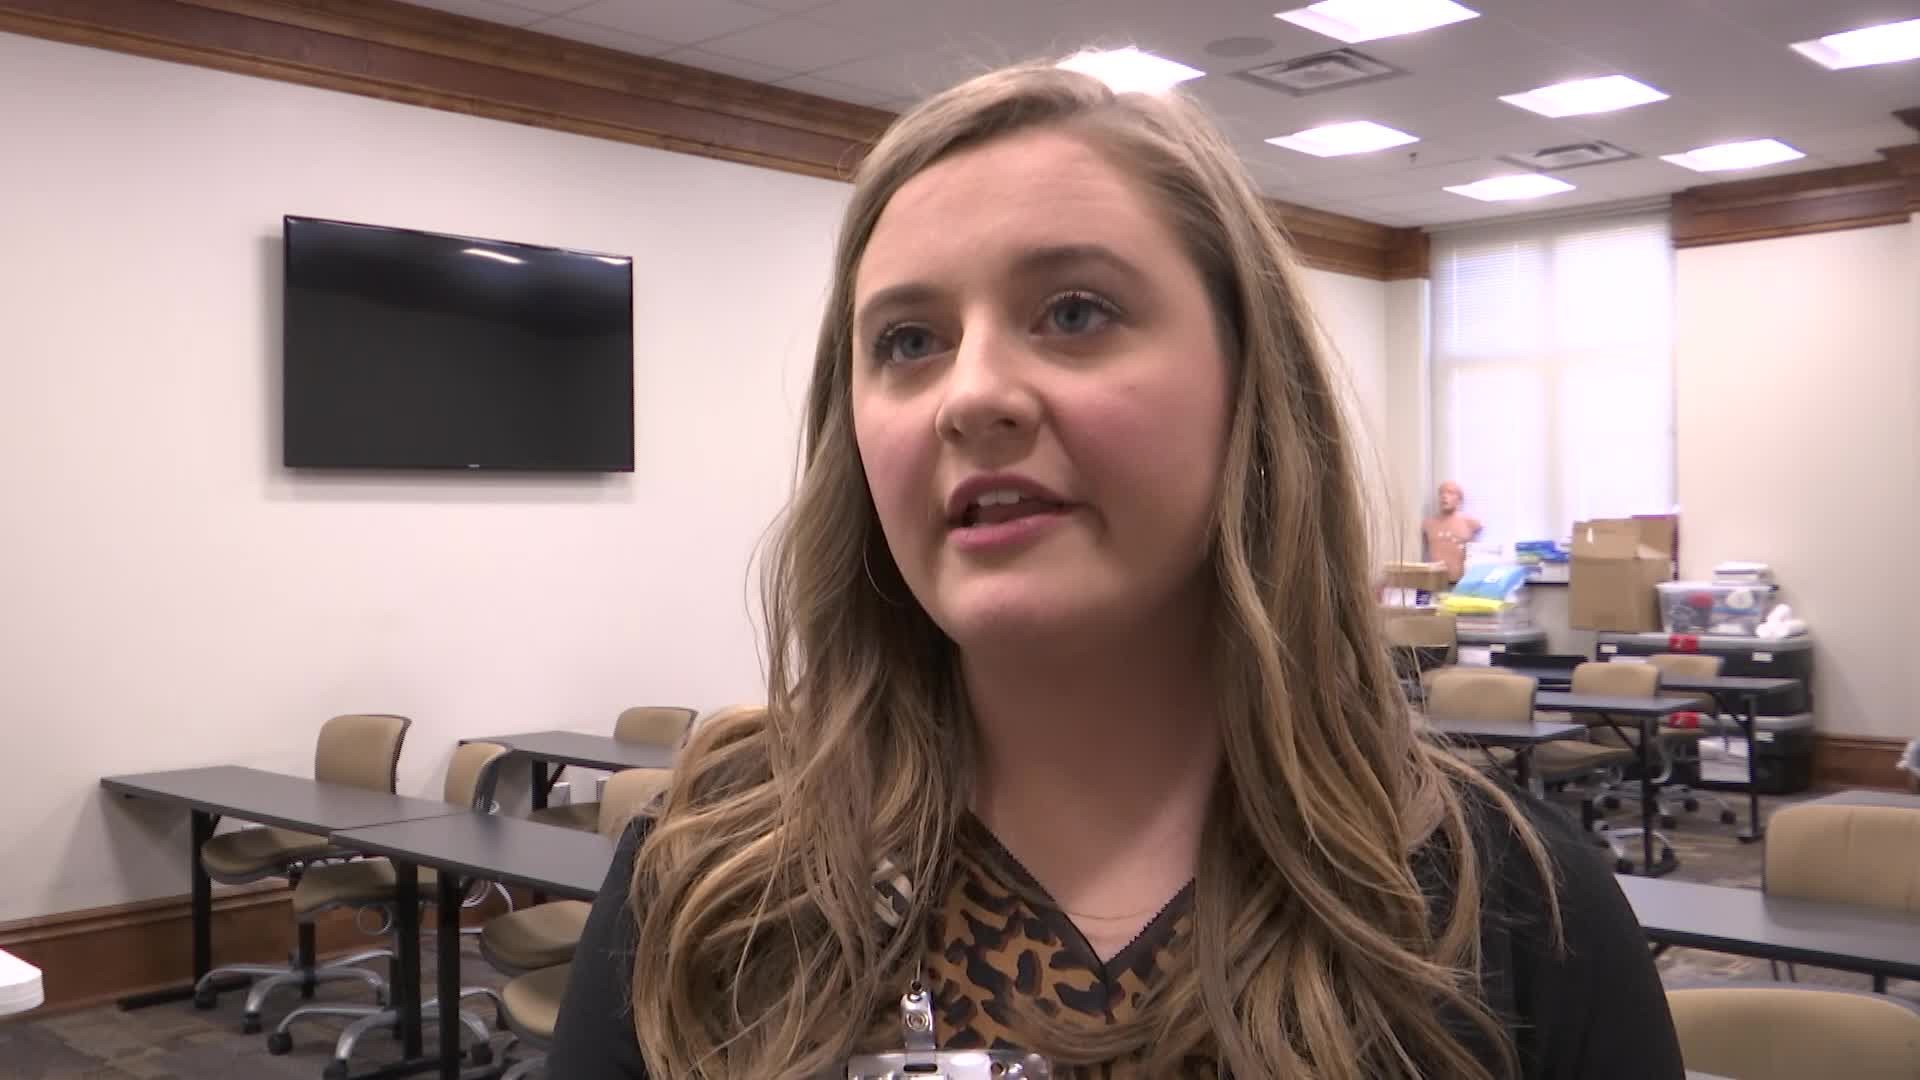 Calhoun Community College nursing seniors, Olivia Knox and Kelsee Proctor, share their perspectives on the loan repayment program created to incentivize students to work in rural areas.